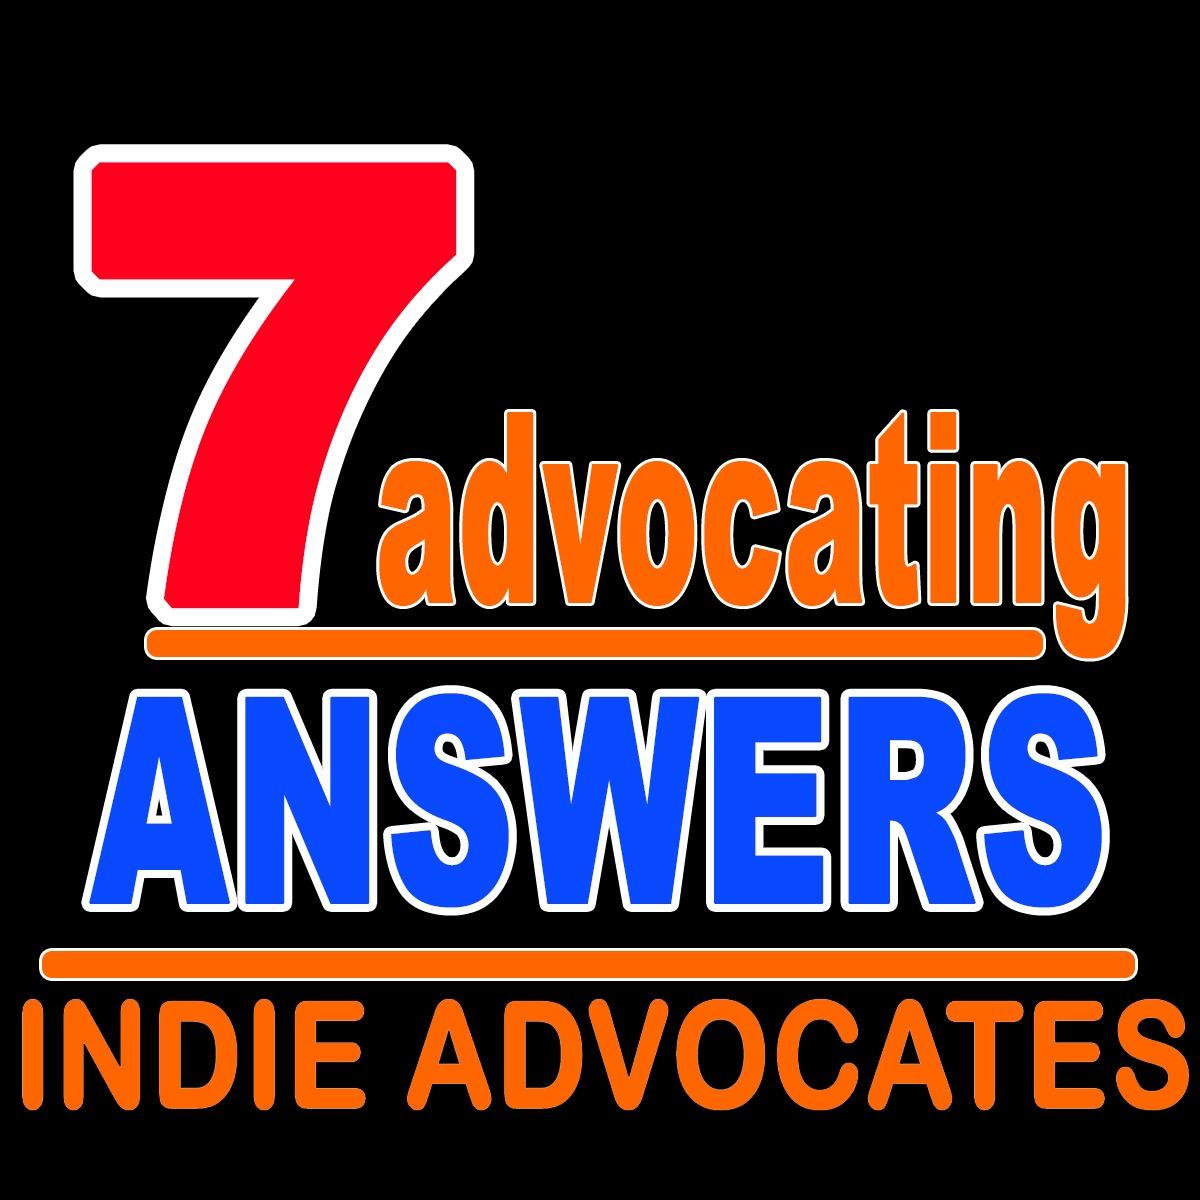 7  Questions and to Create 7 Advocating Answers  .  .